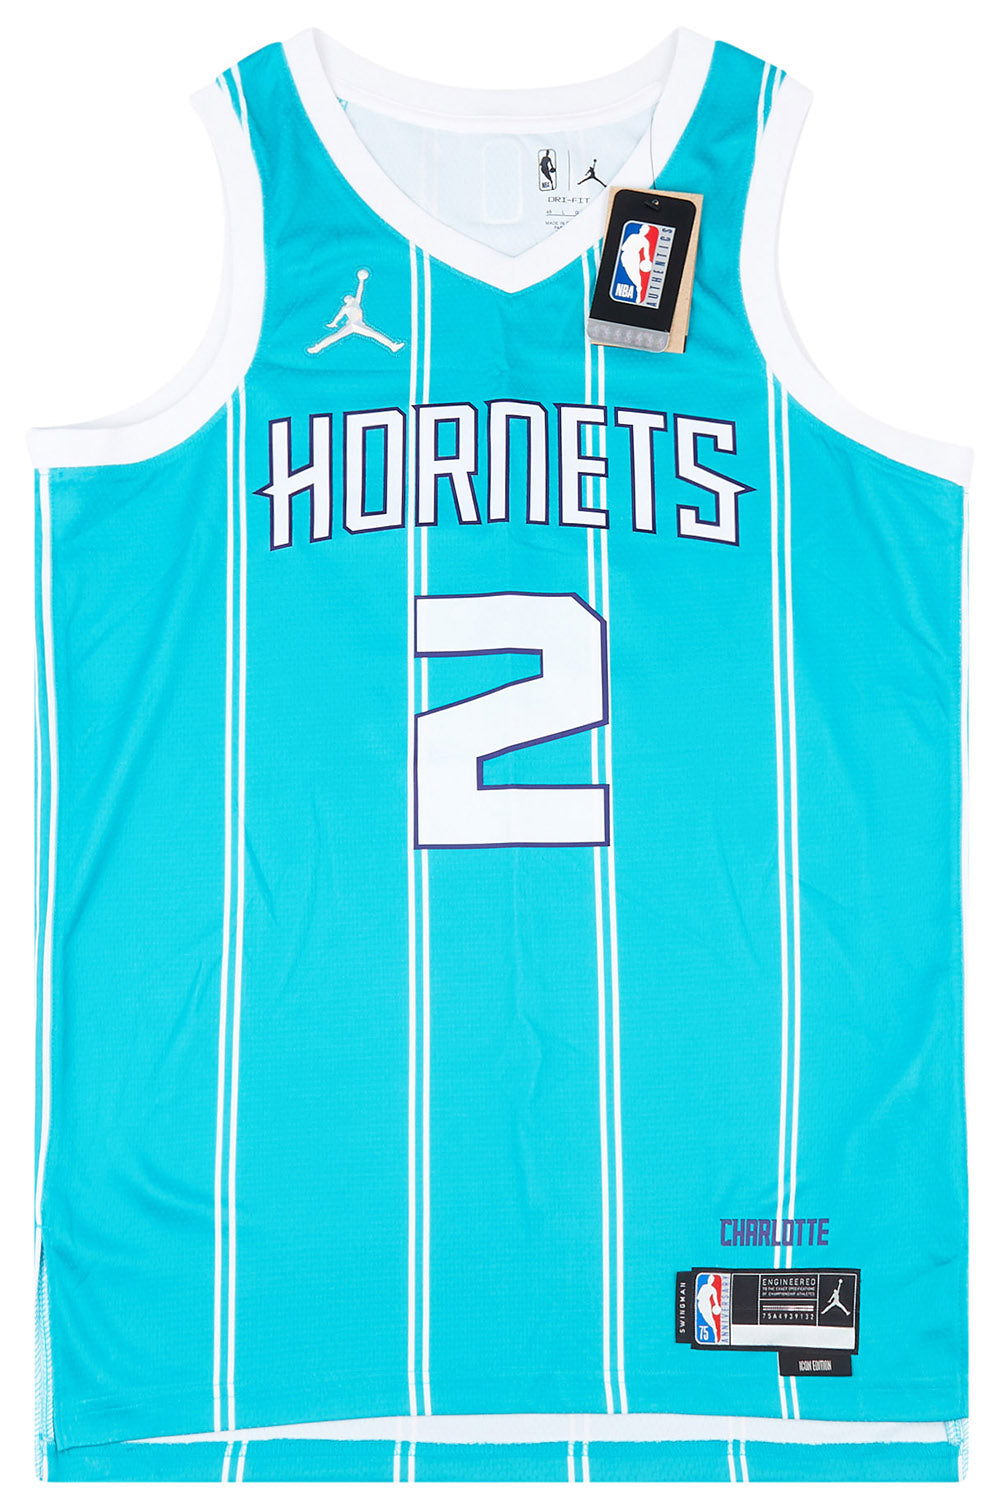 hornets city edition jersey 2021